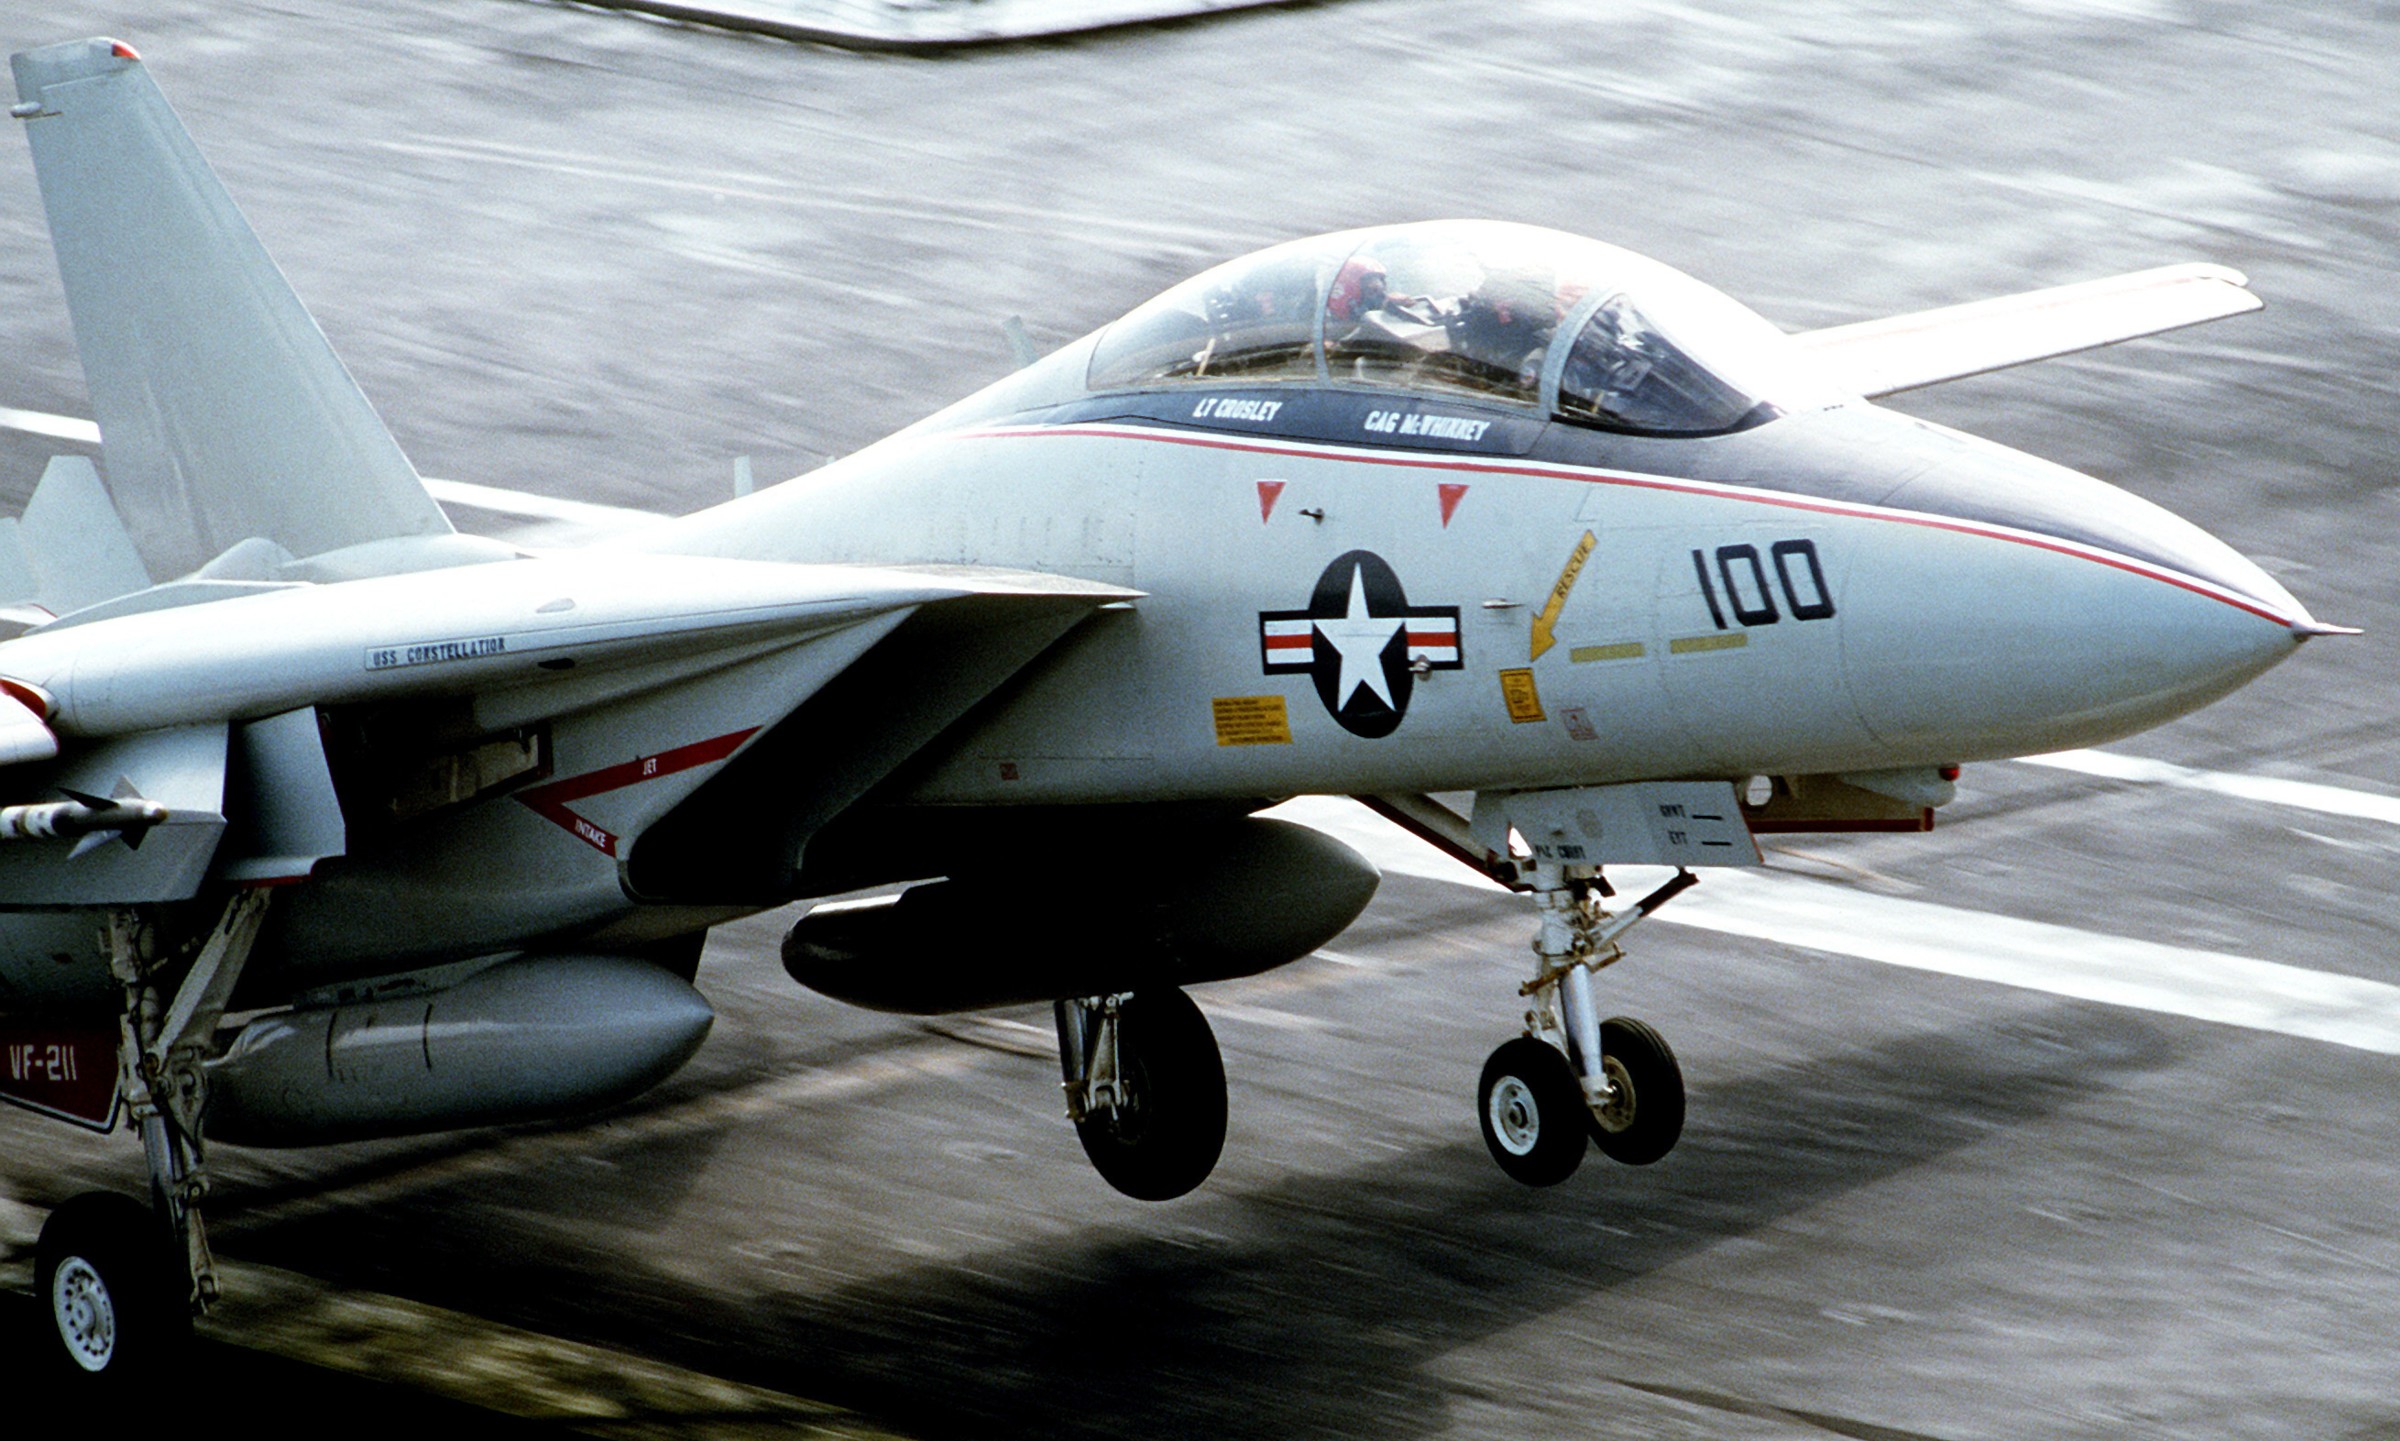 vf-211 fighting checkmates fighter squadron f-14a tomcat us navy carrier air wing cvw-9 uss constellation cv-64 89